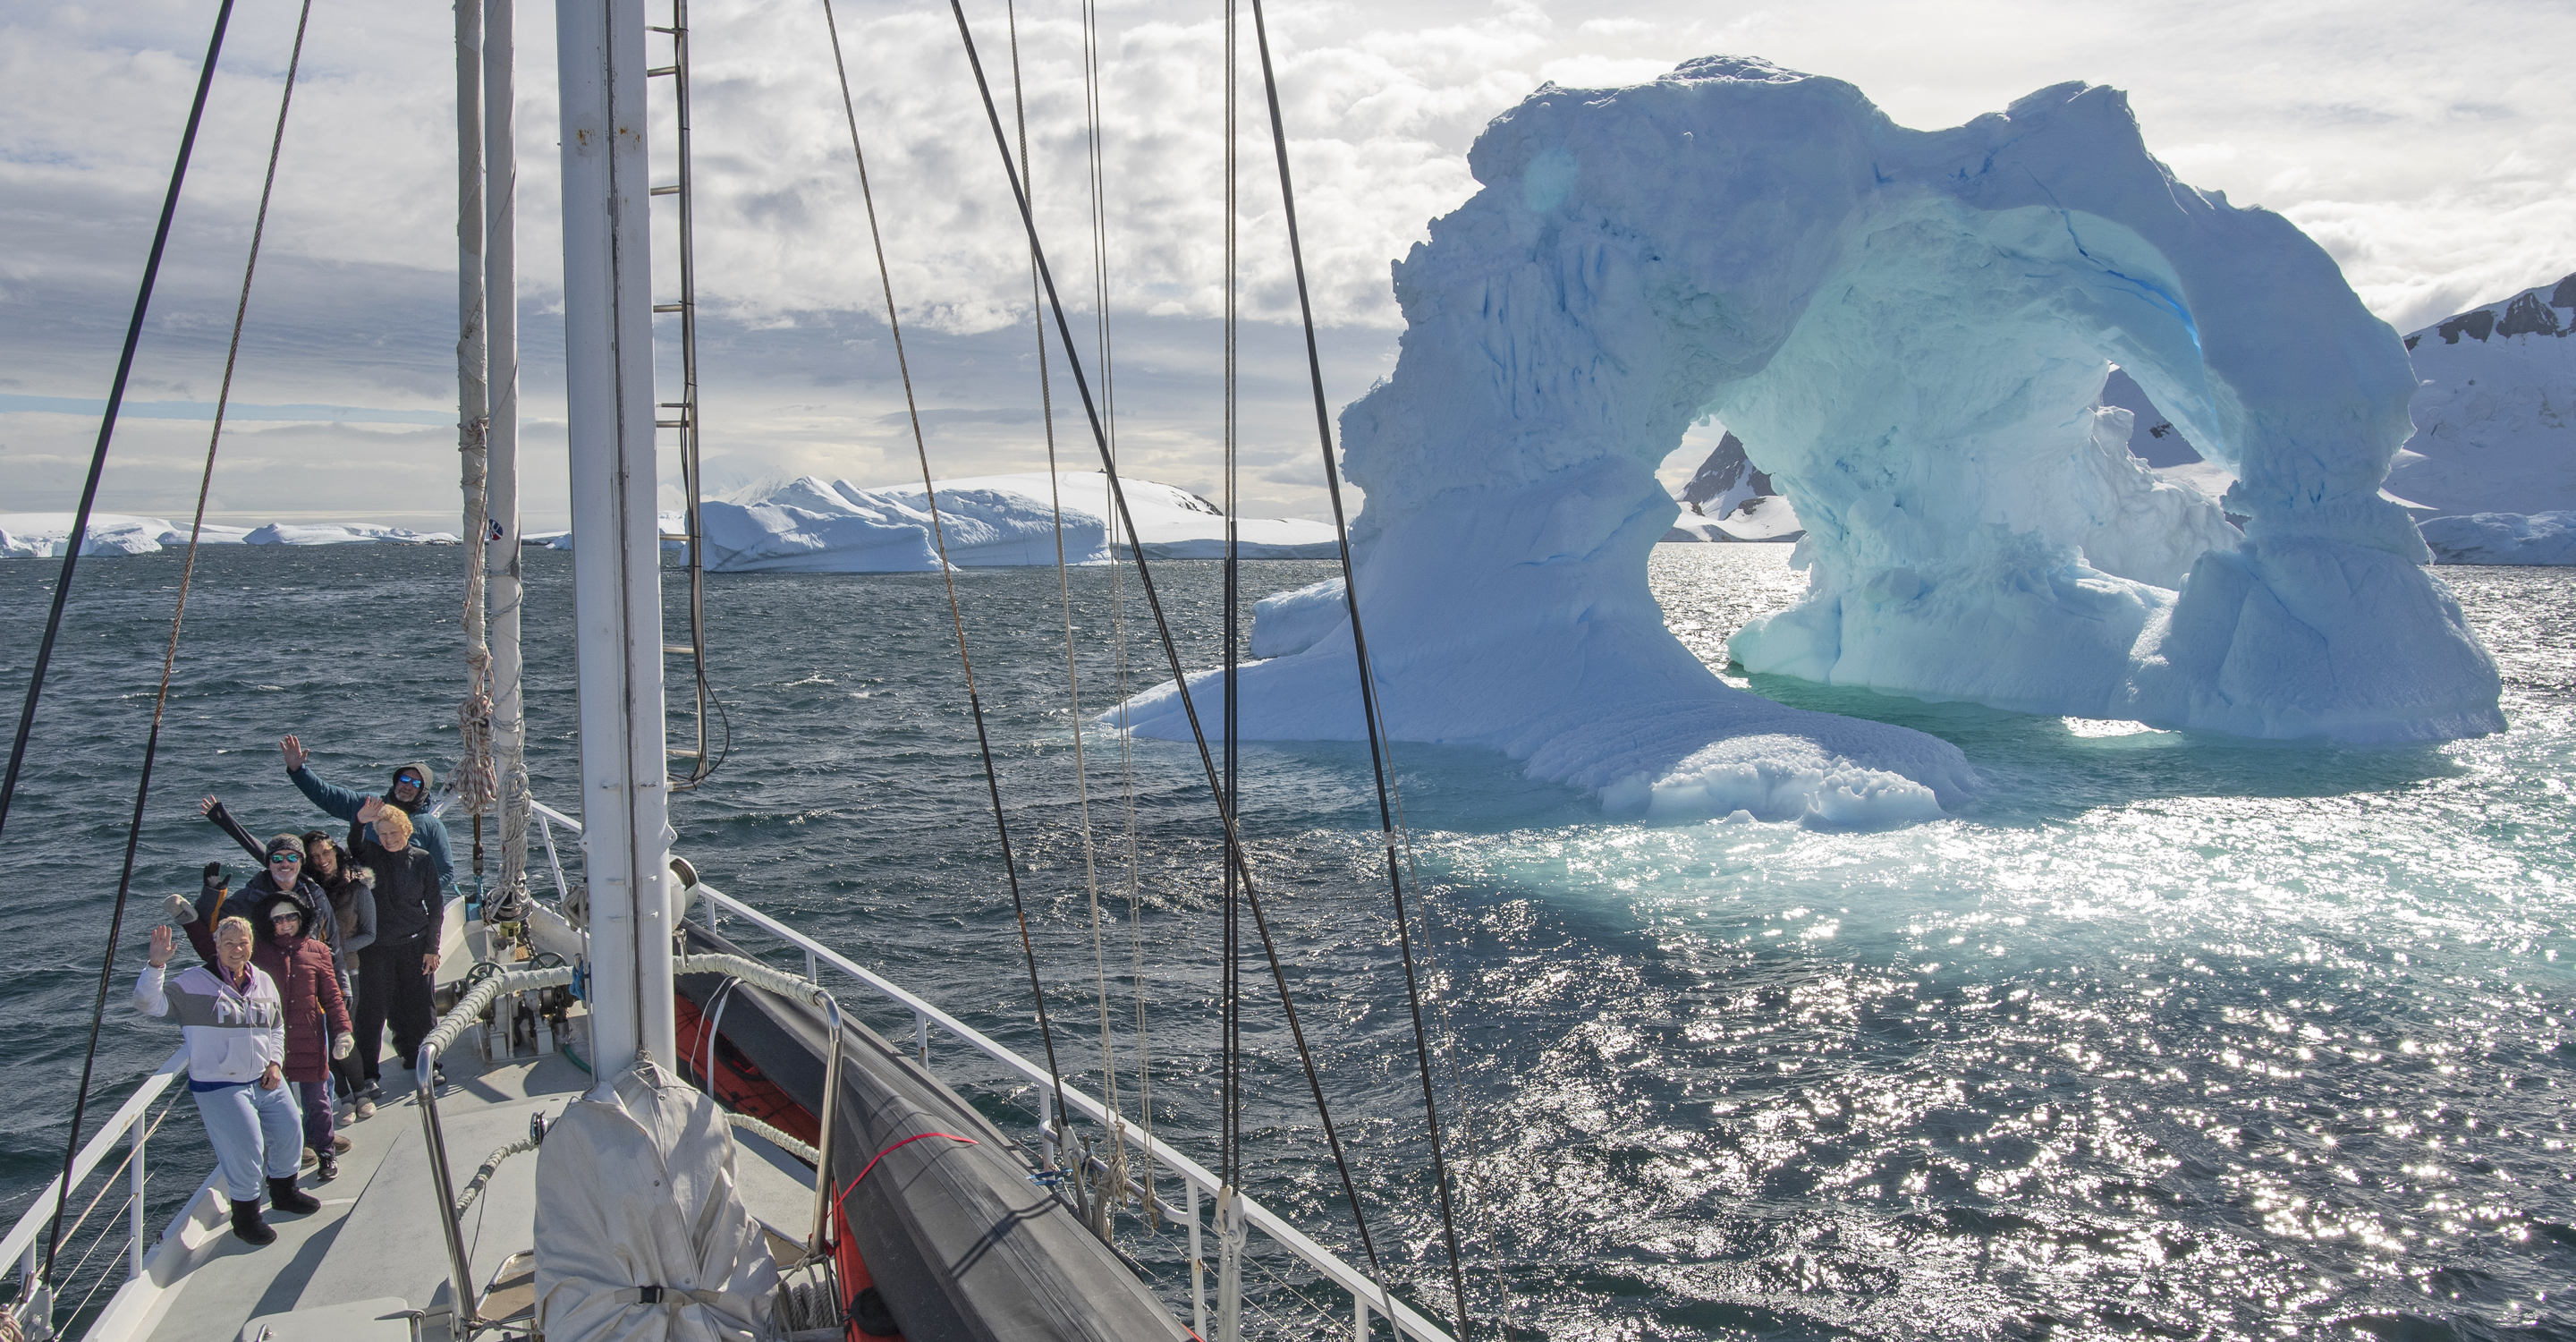 Travelers aboard the S/V Australis wave to the camera as they sail through the waters off Antarctica